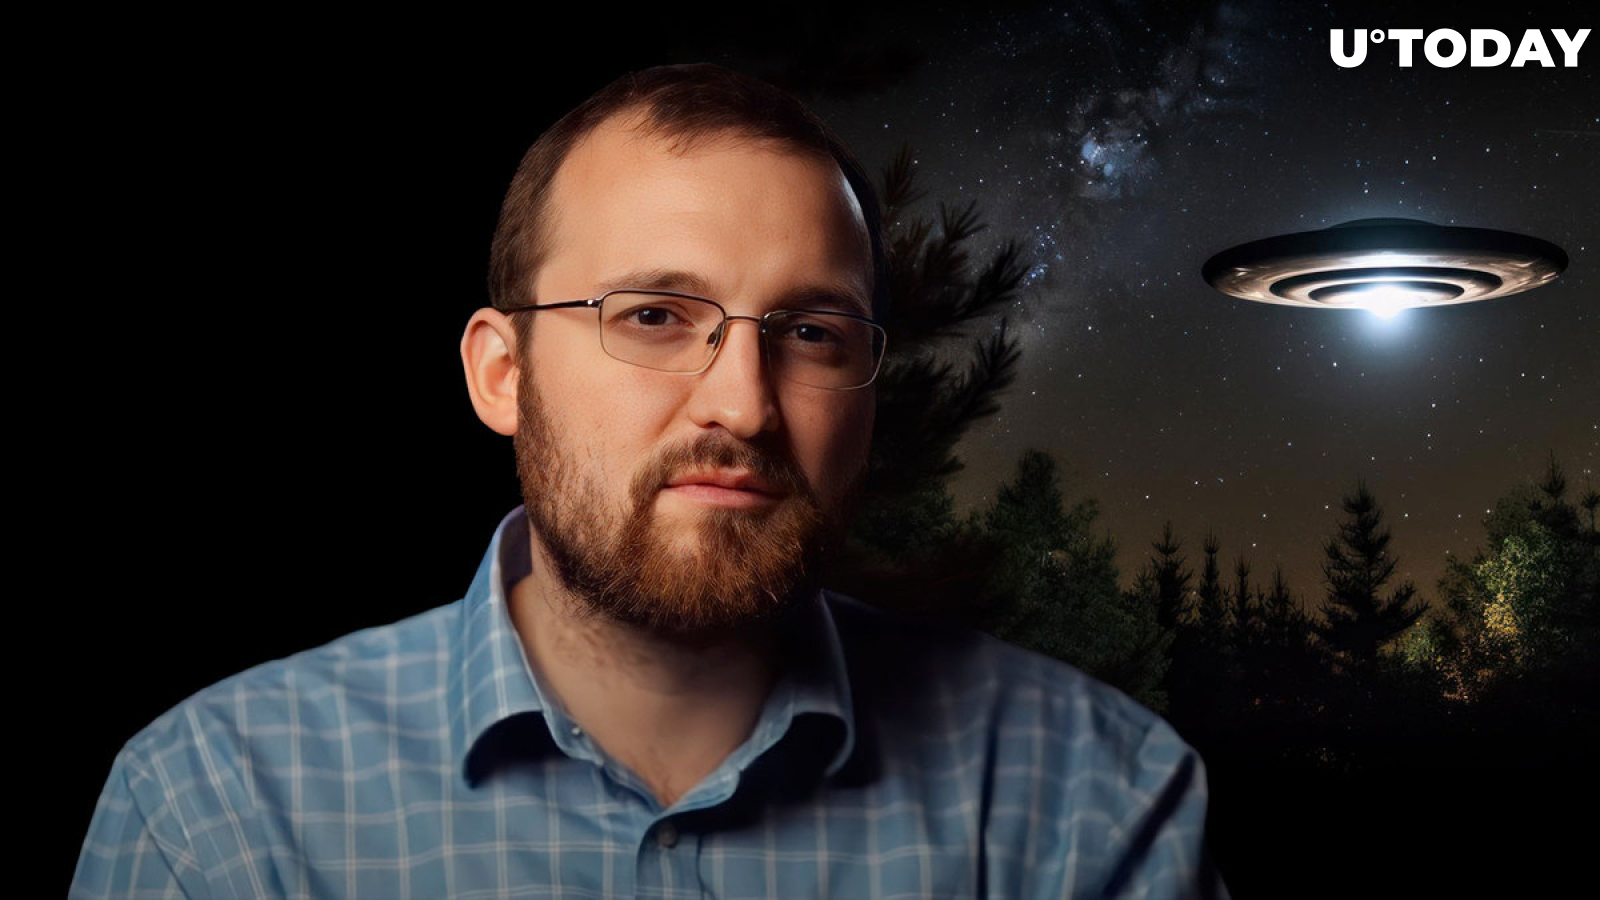 Cardano Founder and UFO Enthusiast Charles Hoskinson Reacts to Mexican Alien News